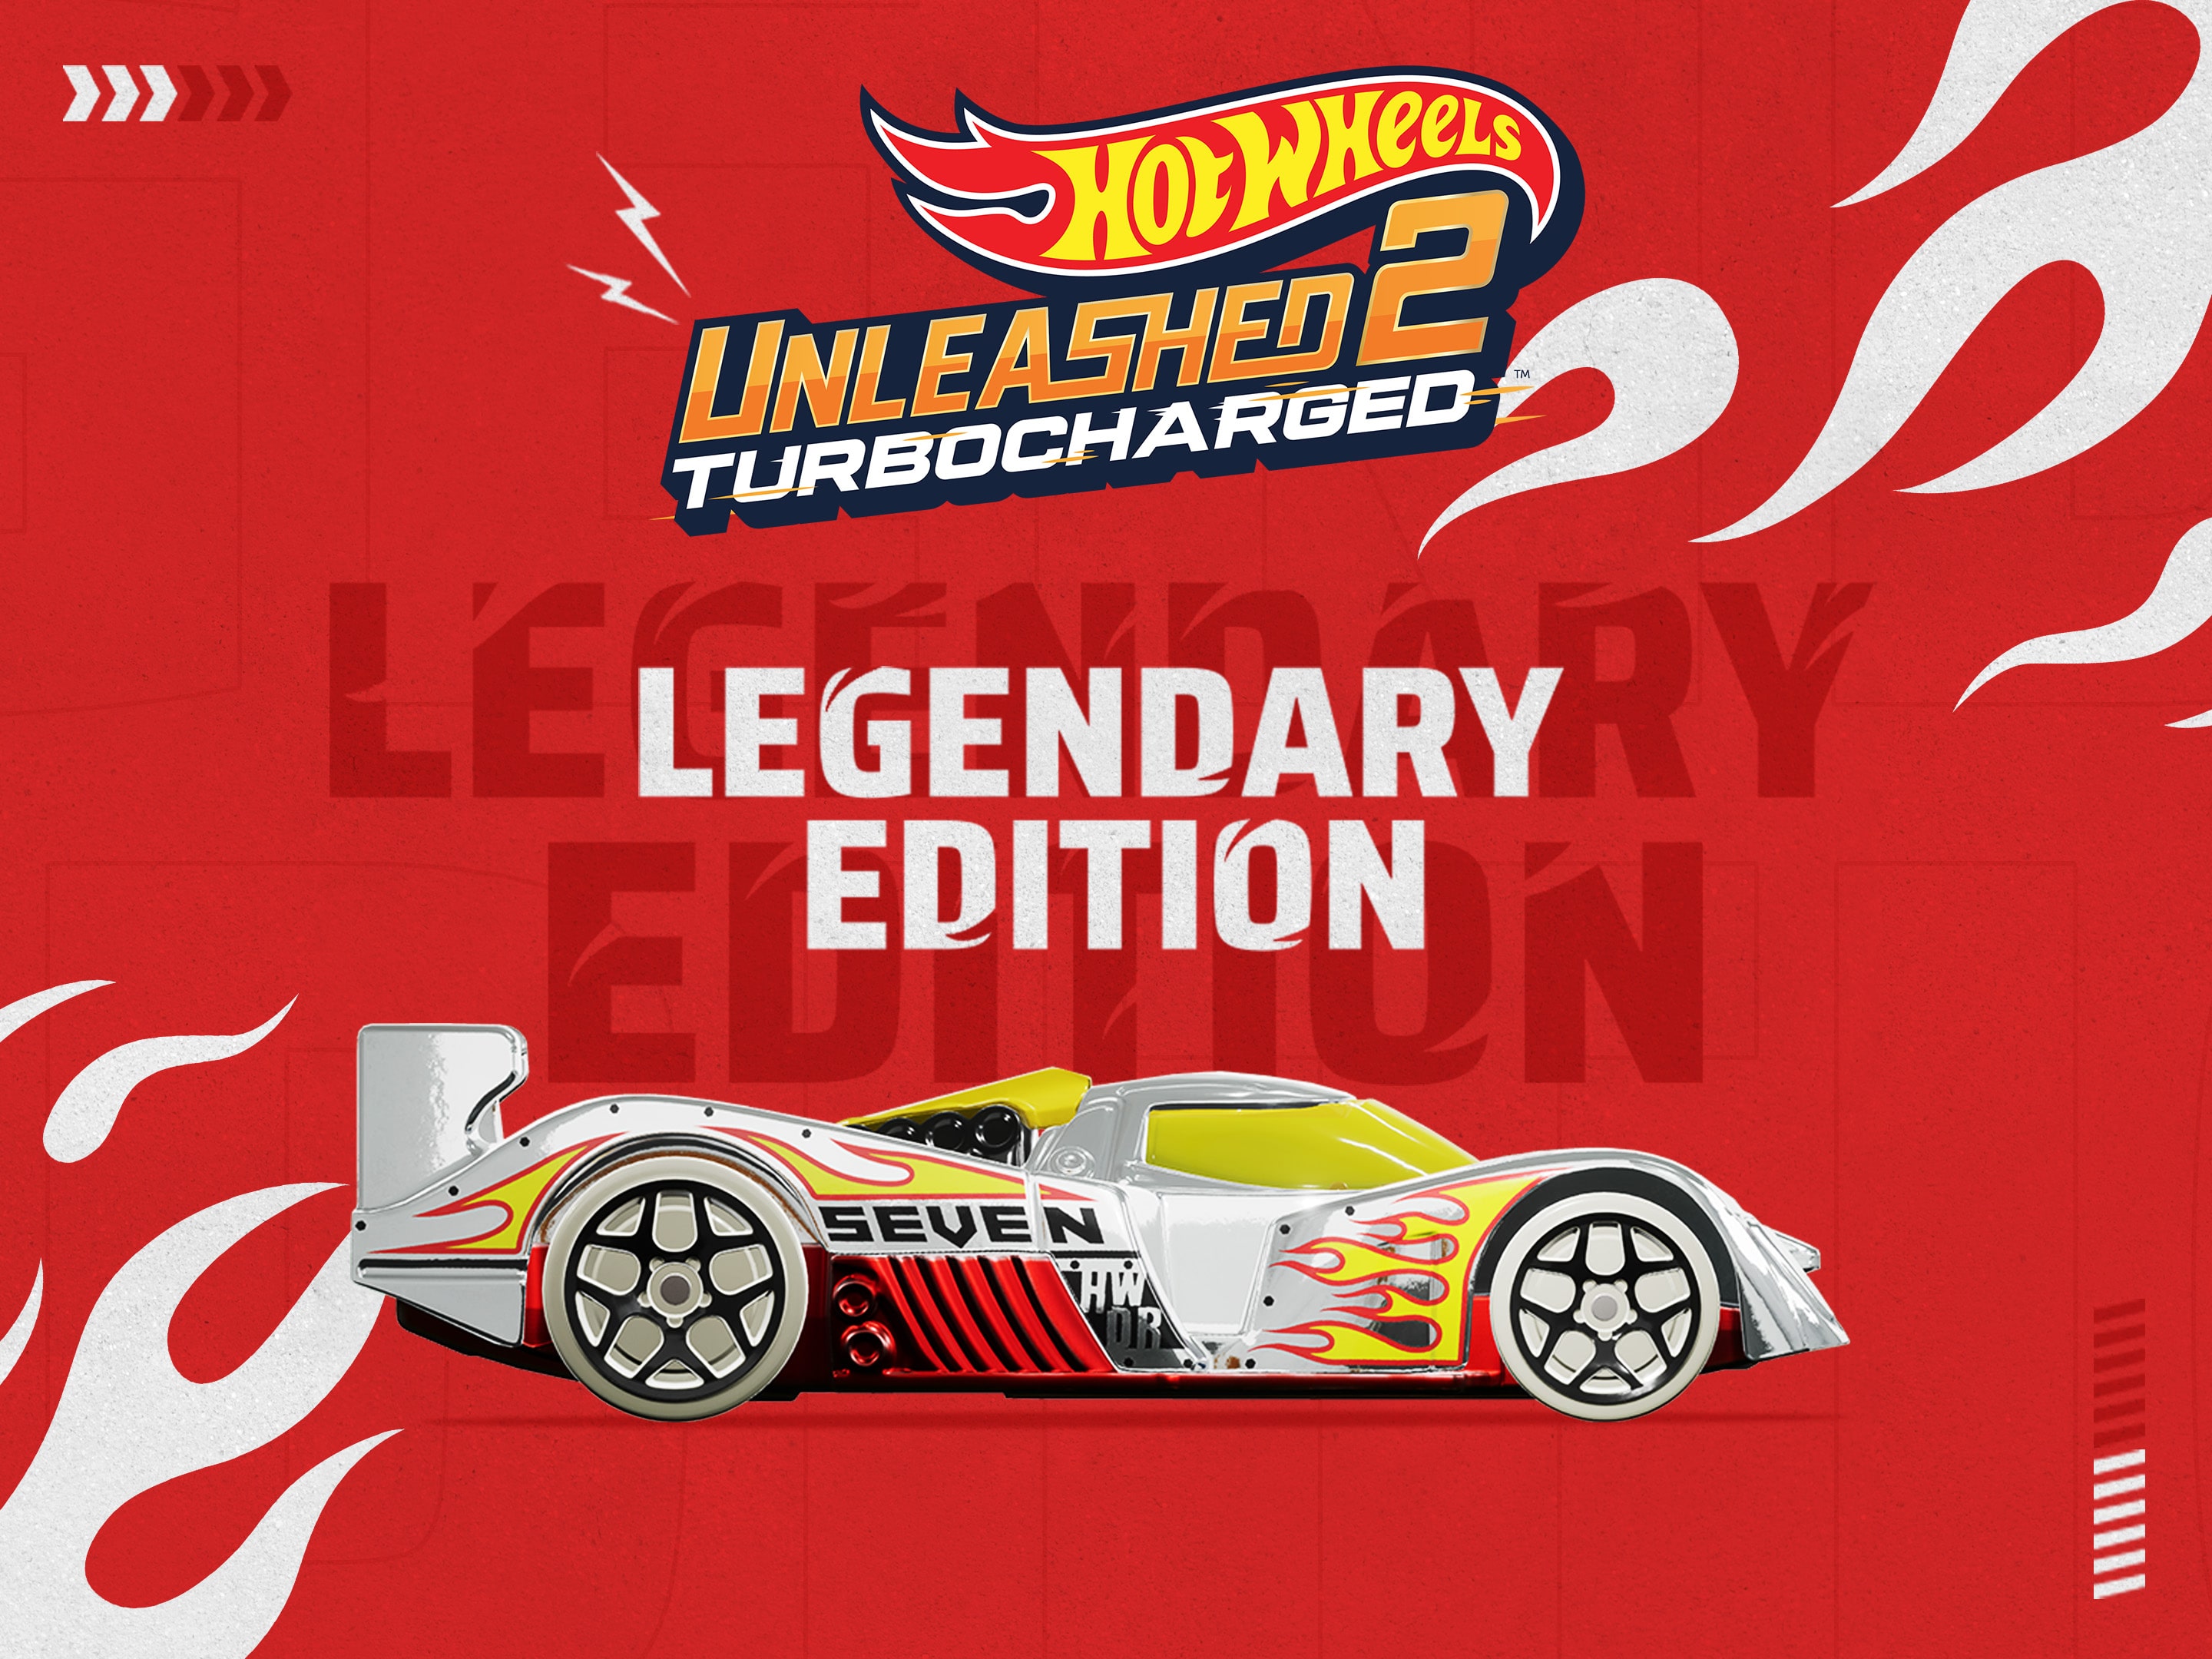 Legendary UNLEASHED™ & Edition - PS4 Turbocharged PS5 WHEELS - 2 HOT